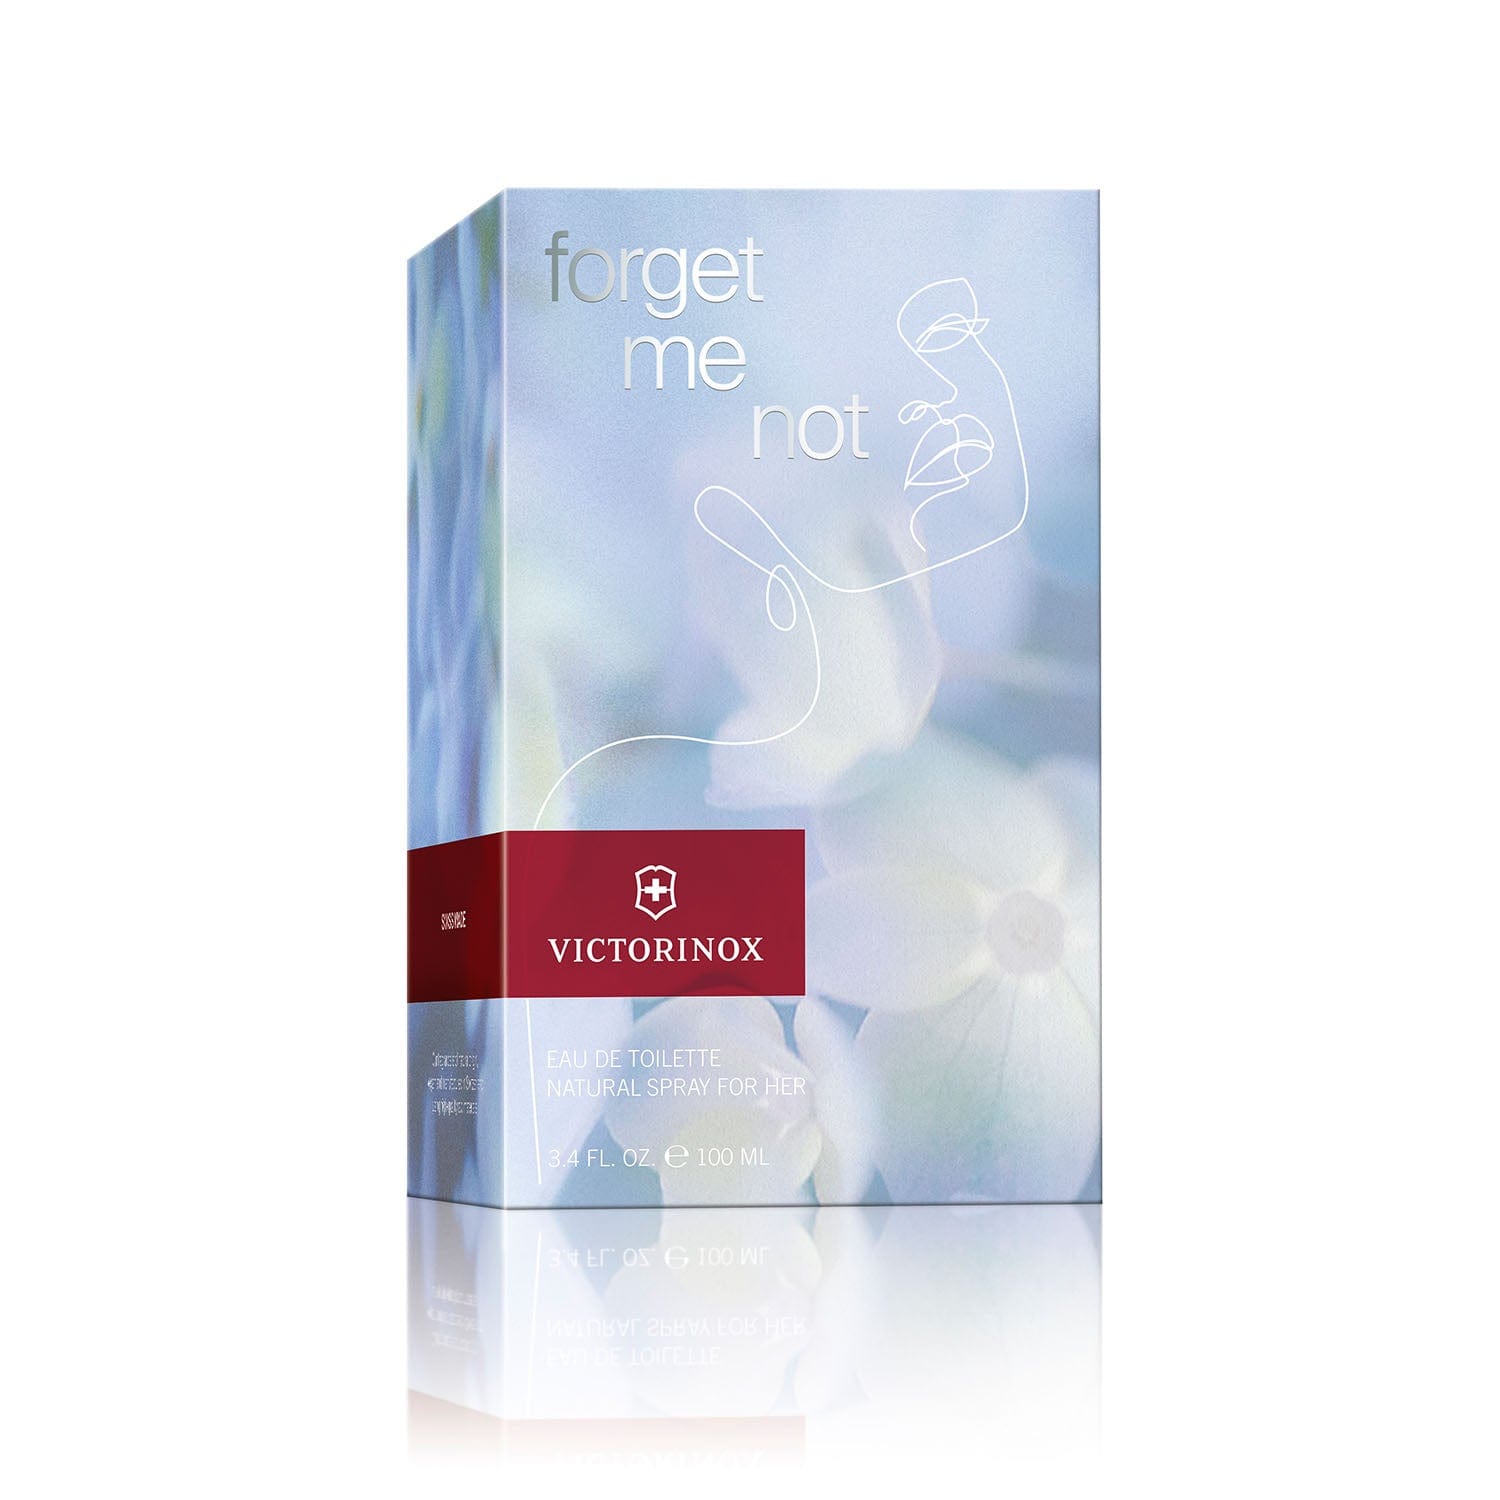 Victorinox forget Me Not for Her EDT 100ml